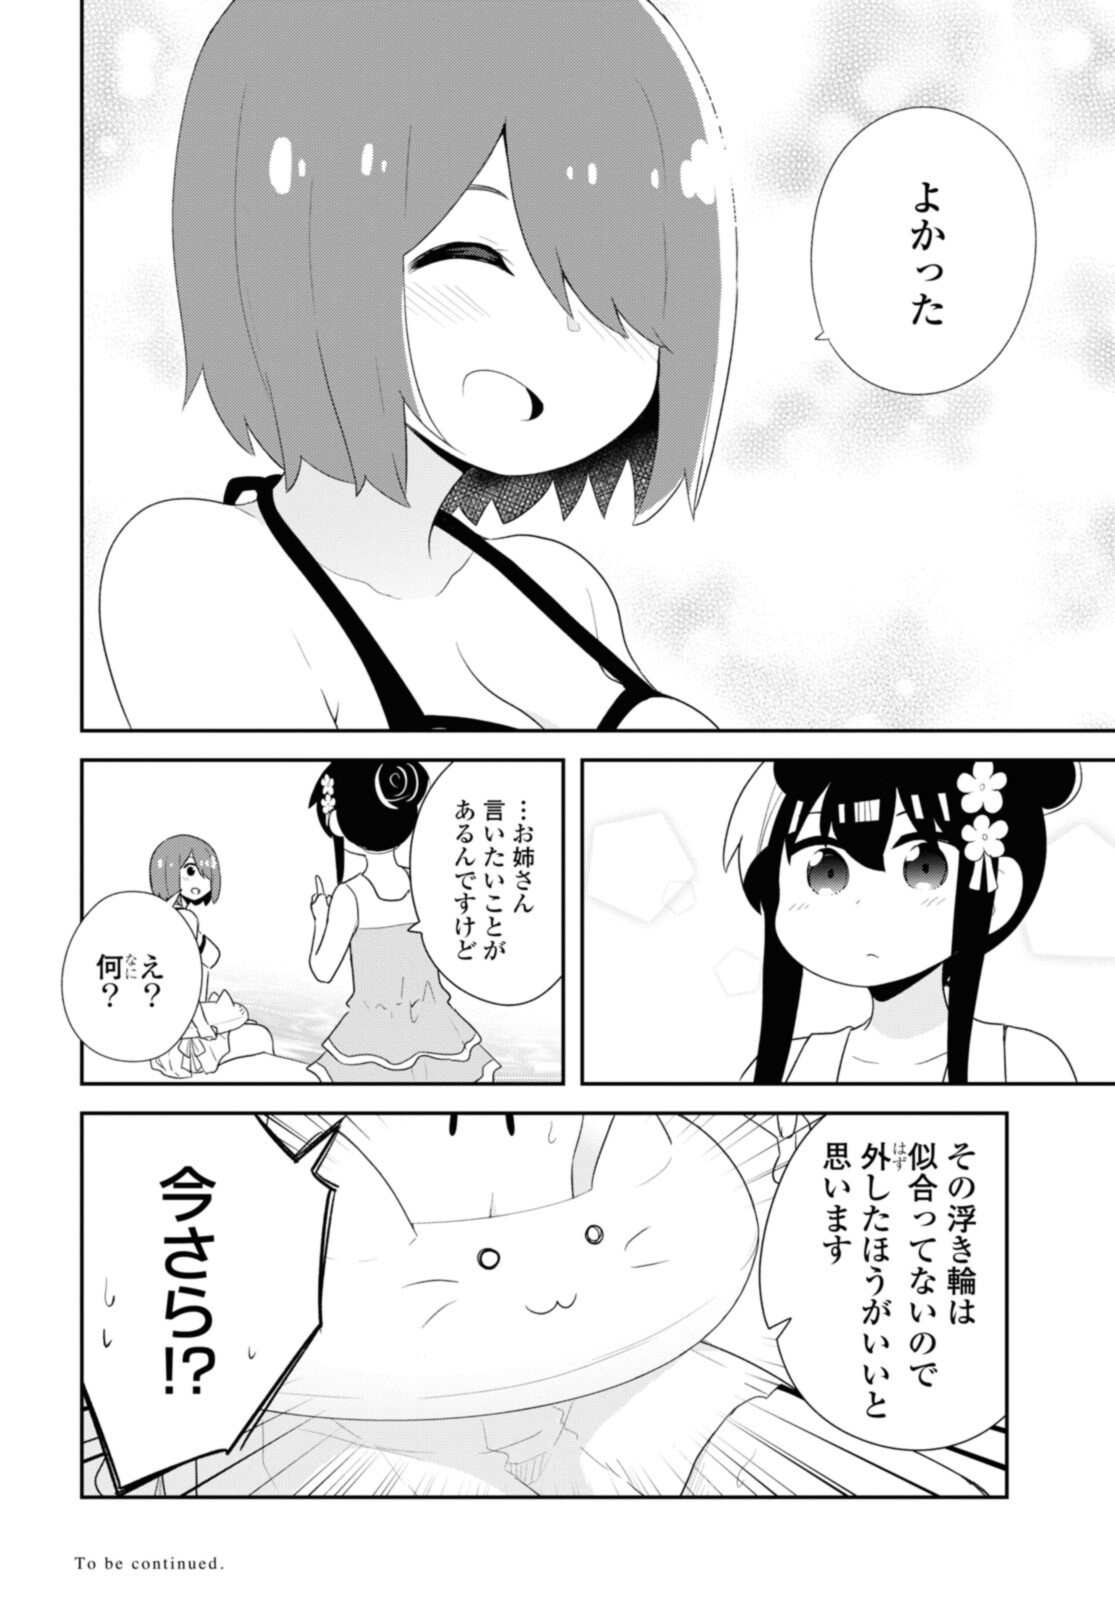 Wataten! An Angel Flew Down to Me 私に天使が舞い降りた！ 第94.2話 - Page 10